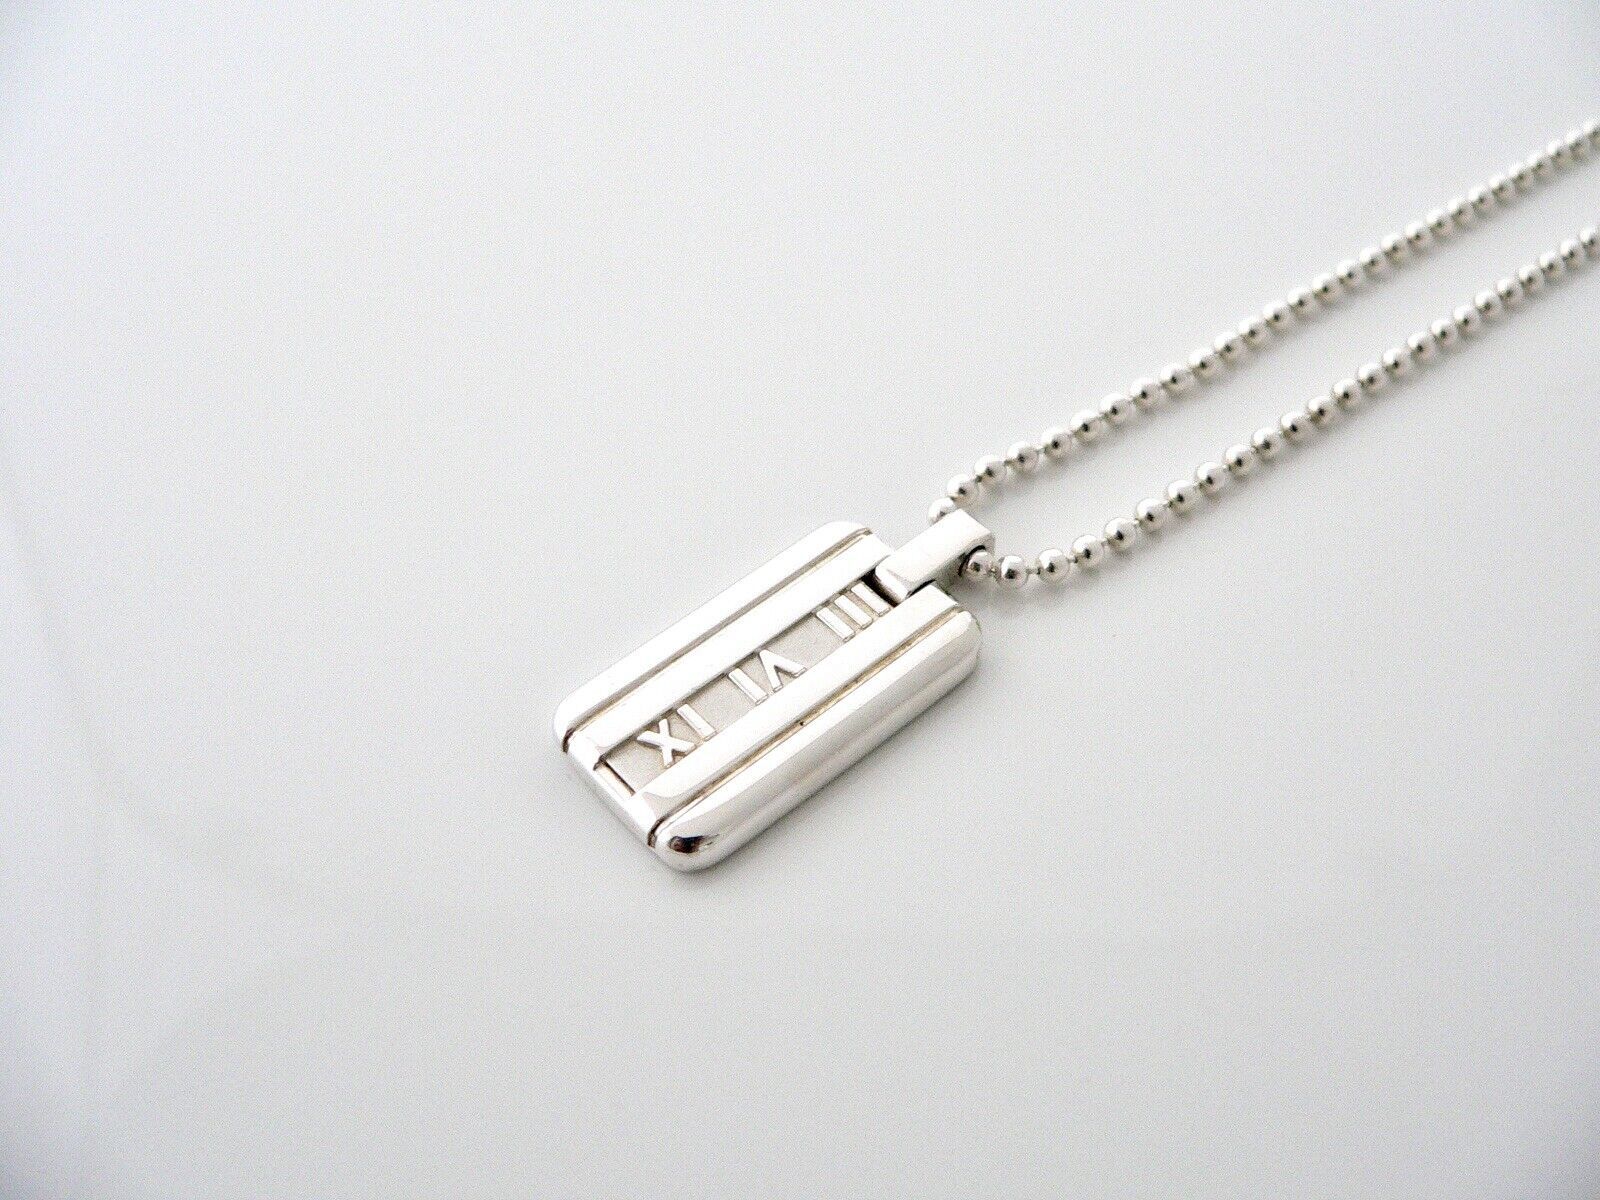 Tiffany & Co Silver Atlas Dog Tag Bar Beaded Necklace Pendant Chain Gift Love - $328.00